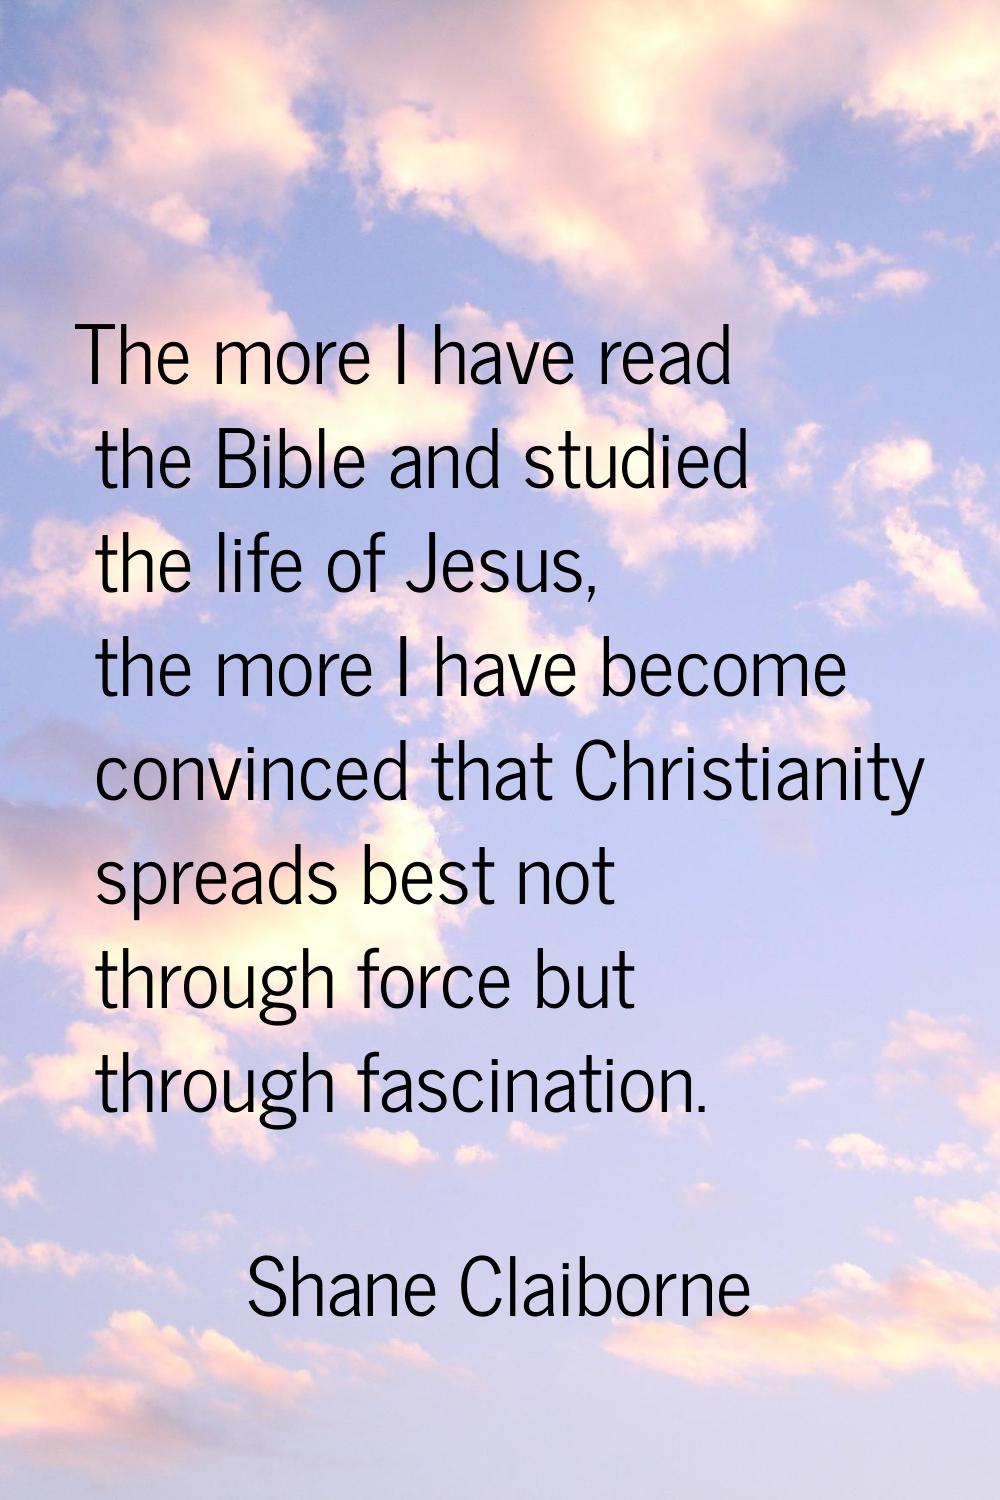 The more I have read the Bible and studied the life of Jesus, the more I have become convinced that